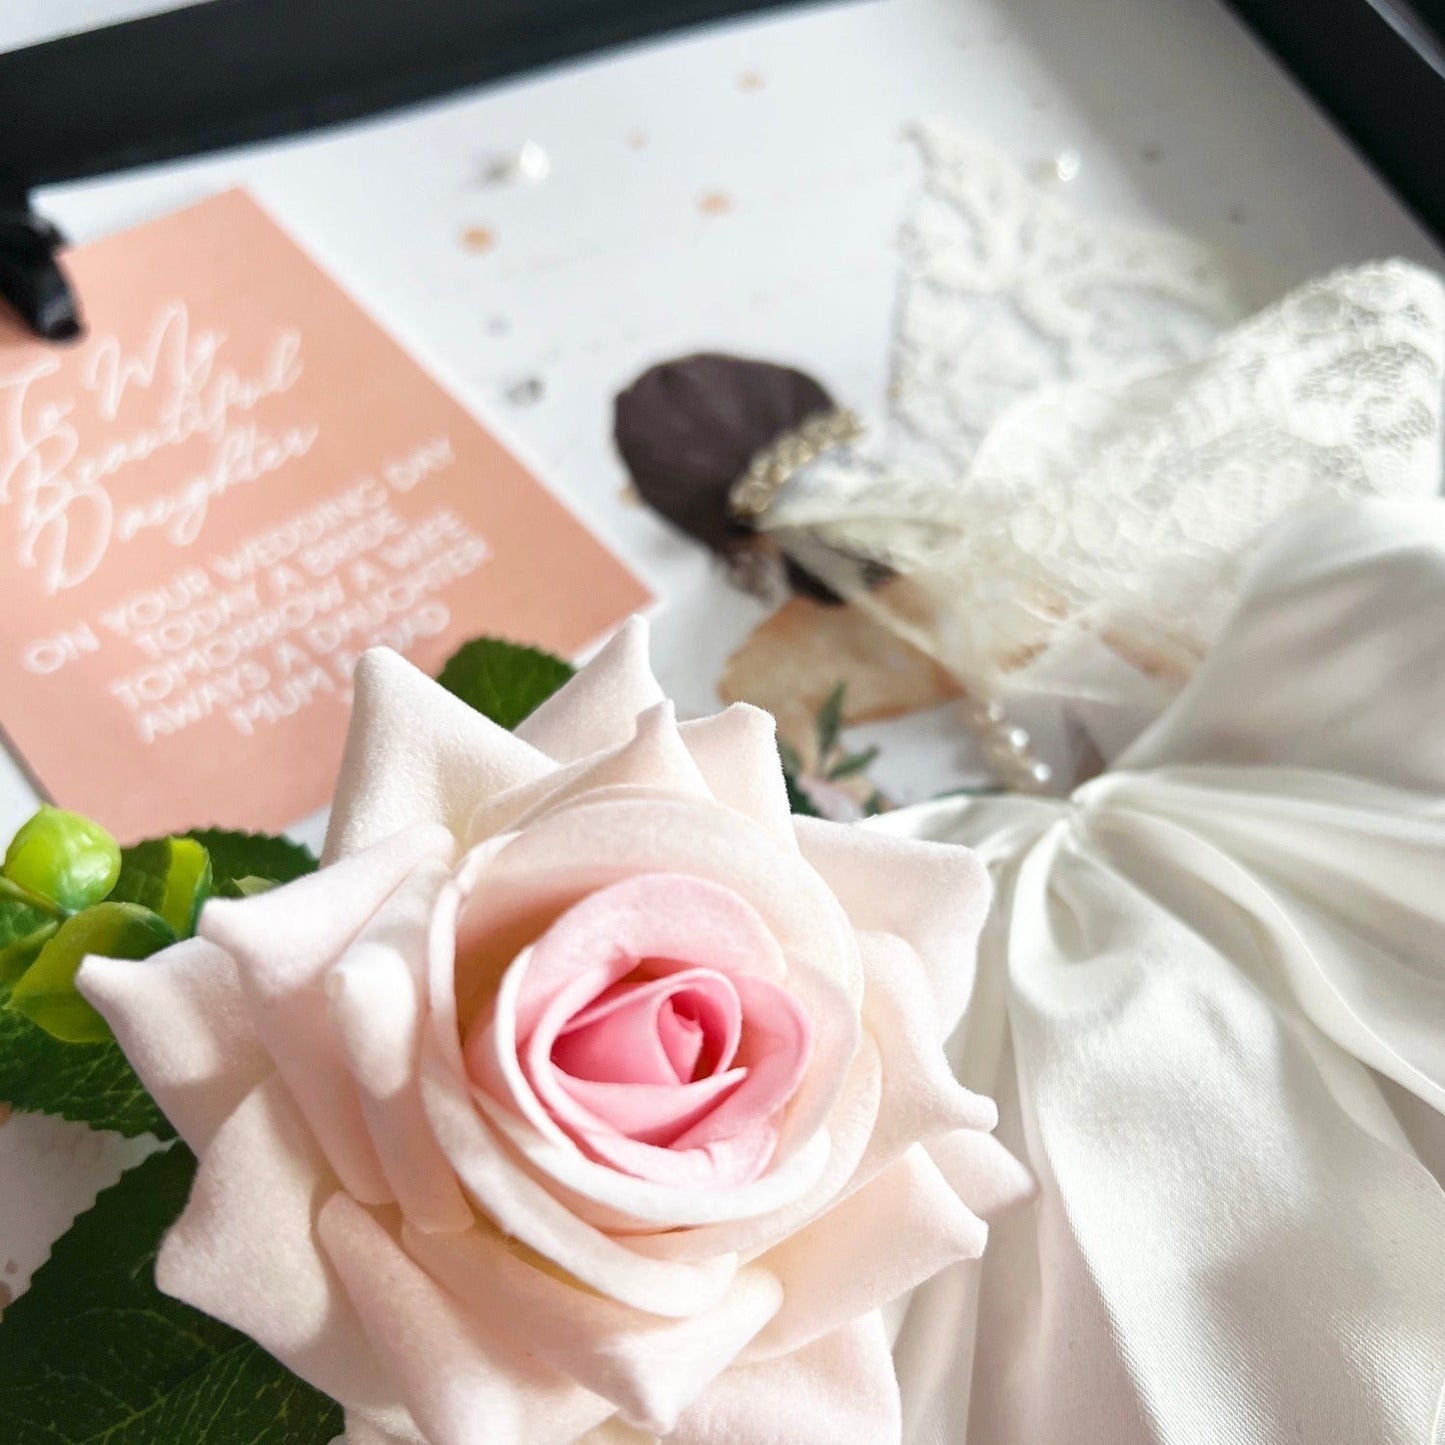 Blush rose wedding card for my Niece from Aunty and Uncle | Luxury keepsake wedding cards personalised with wording